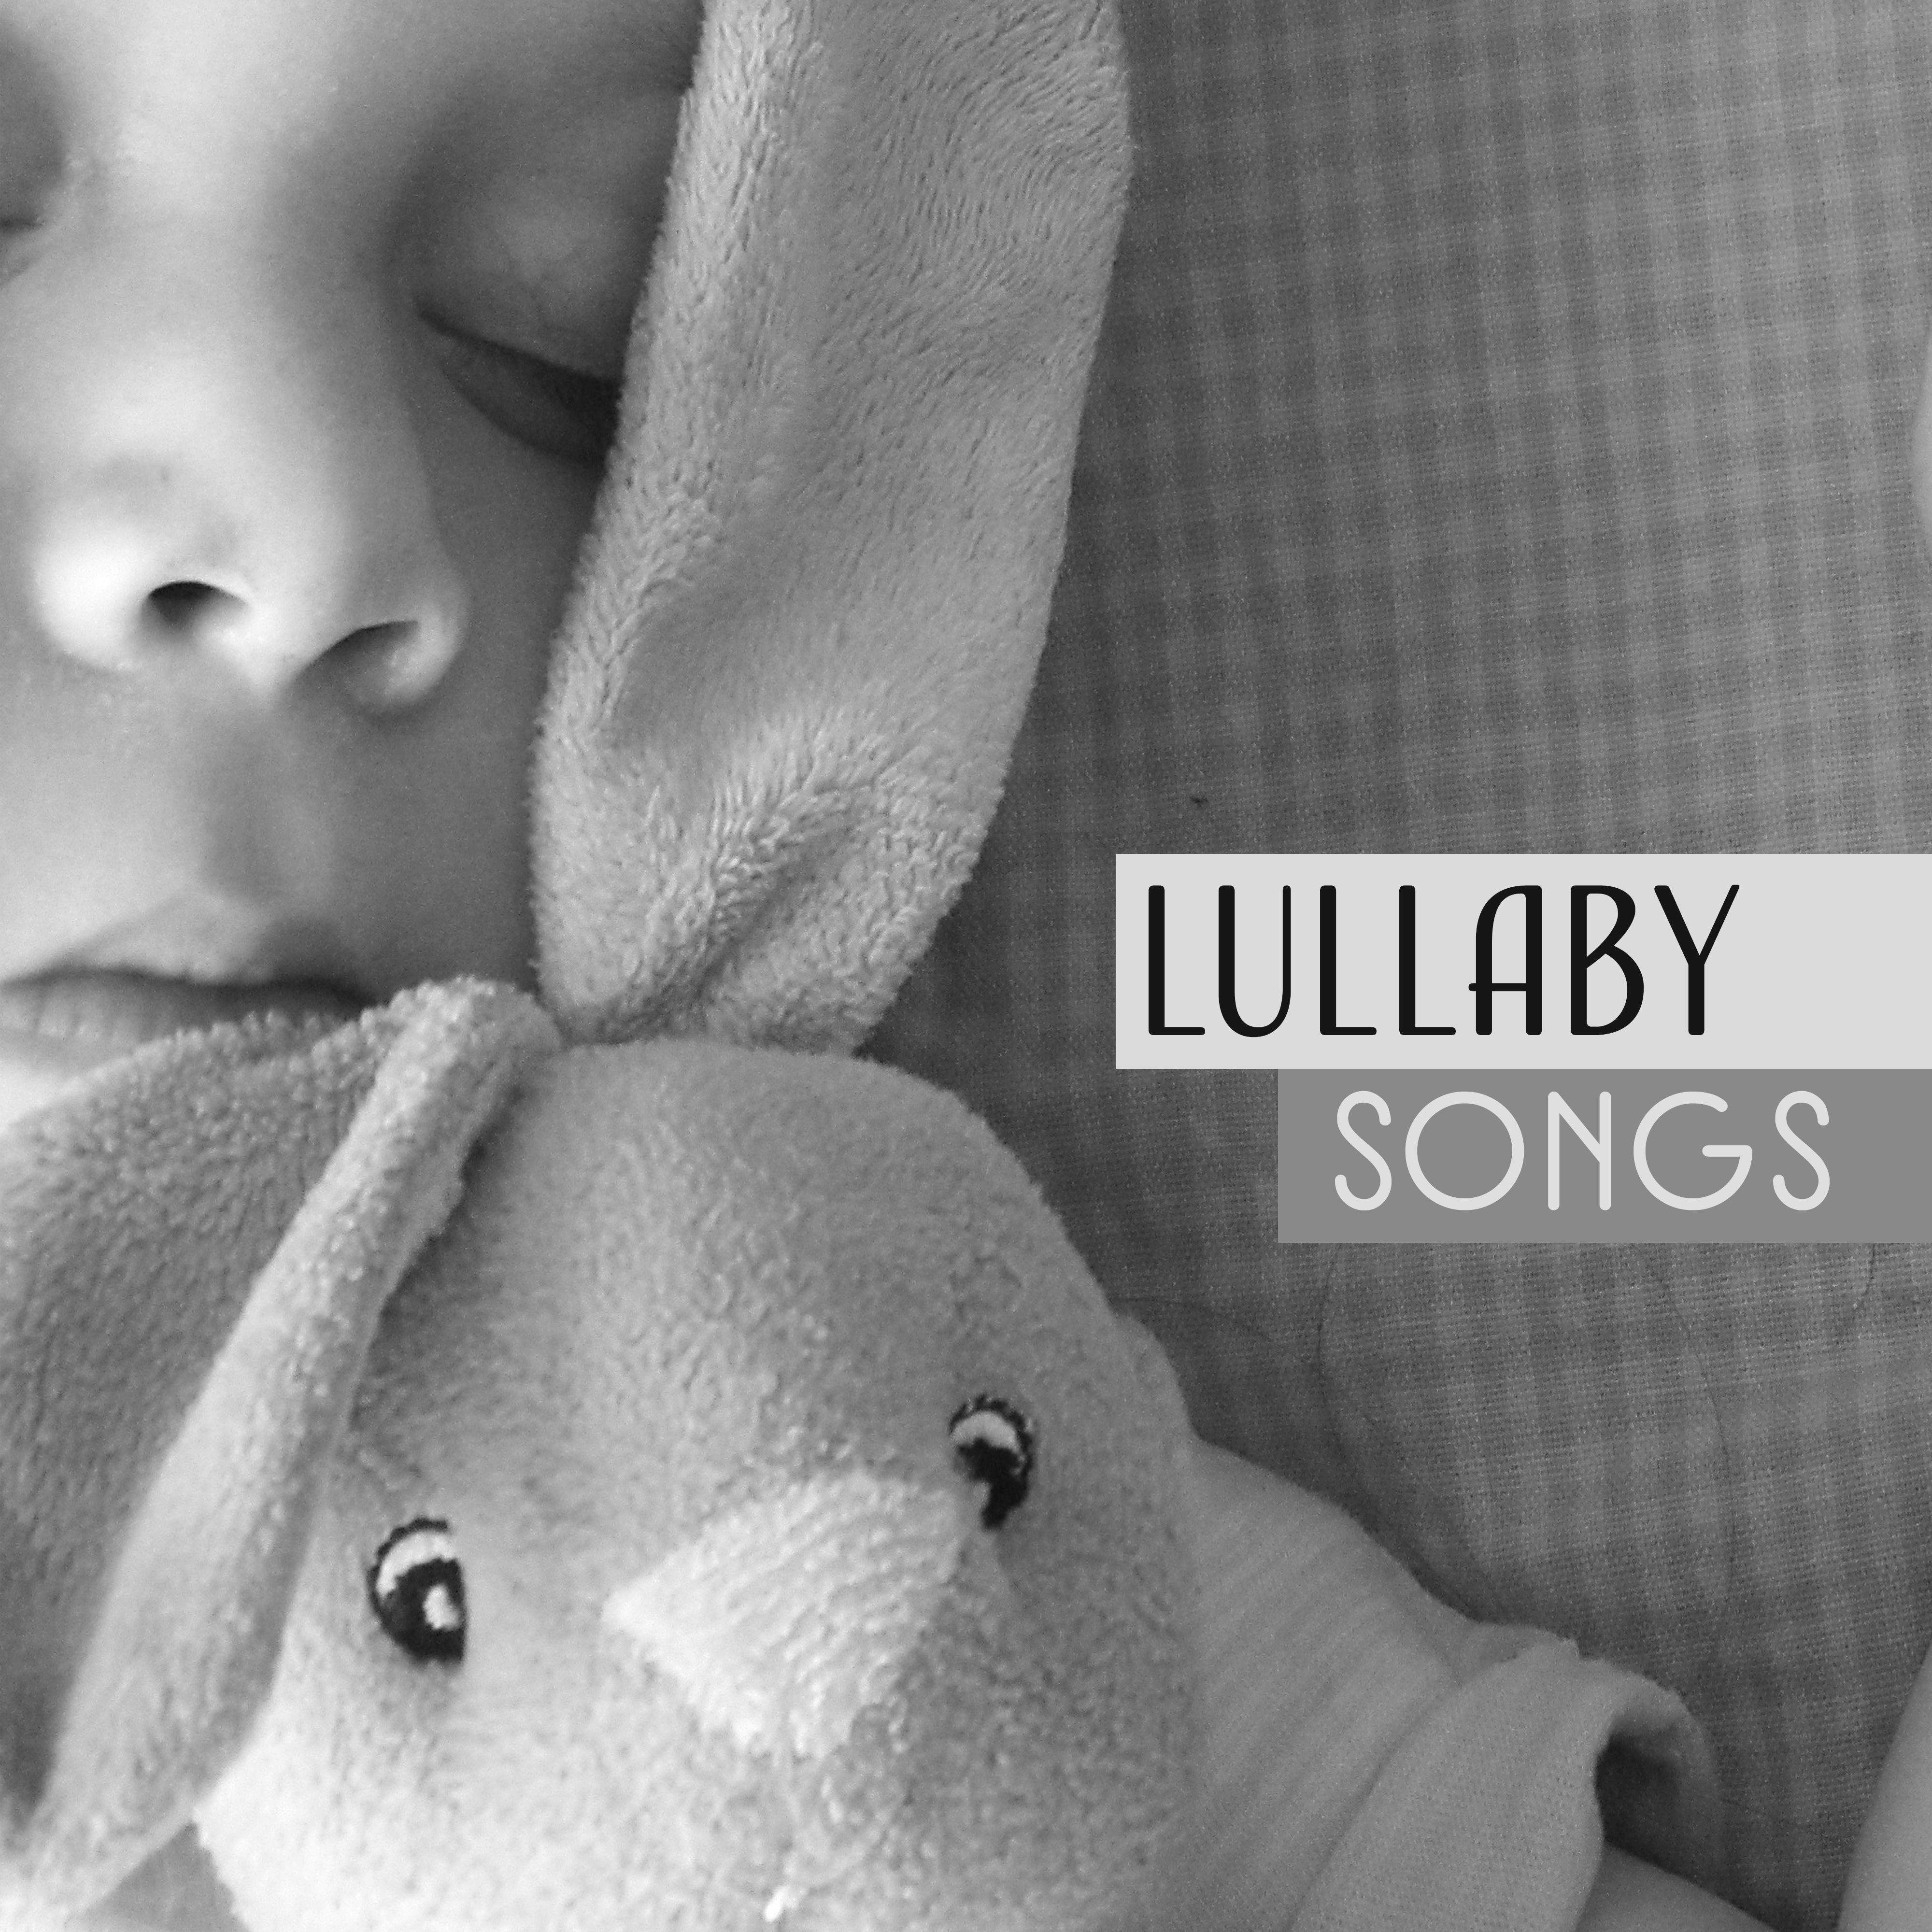 Lullaby Songs  New Lullabies Compilation, Classical Music for Babies, Smart  Healthy Baby Development